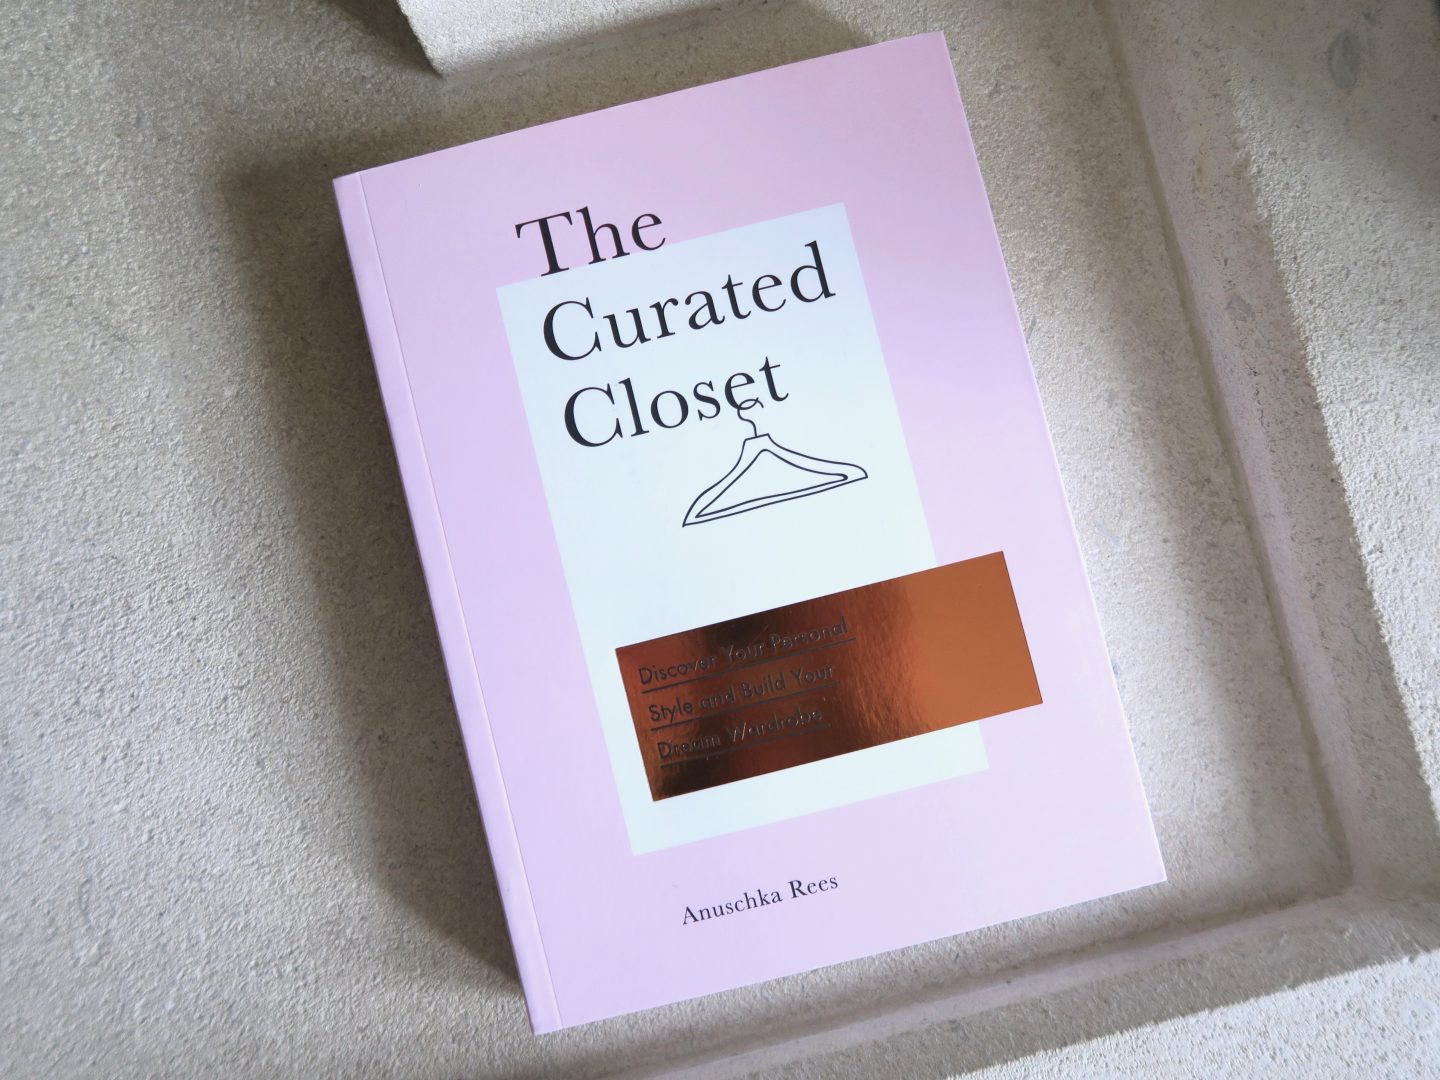 The Curated Closet by Anushka Rees | Curiously Conscious